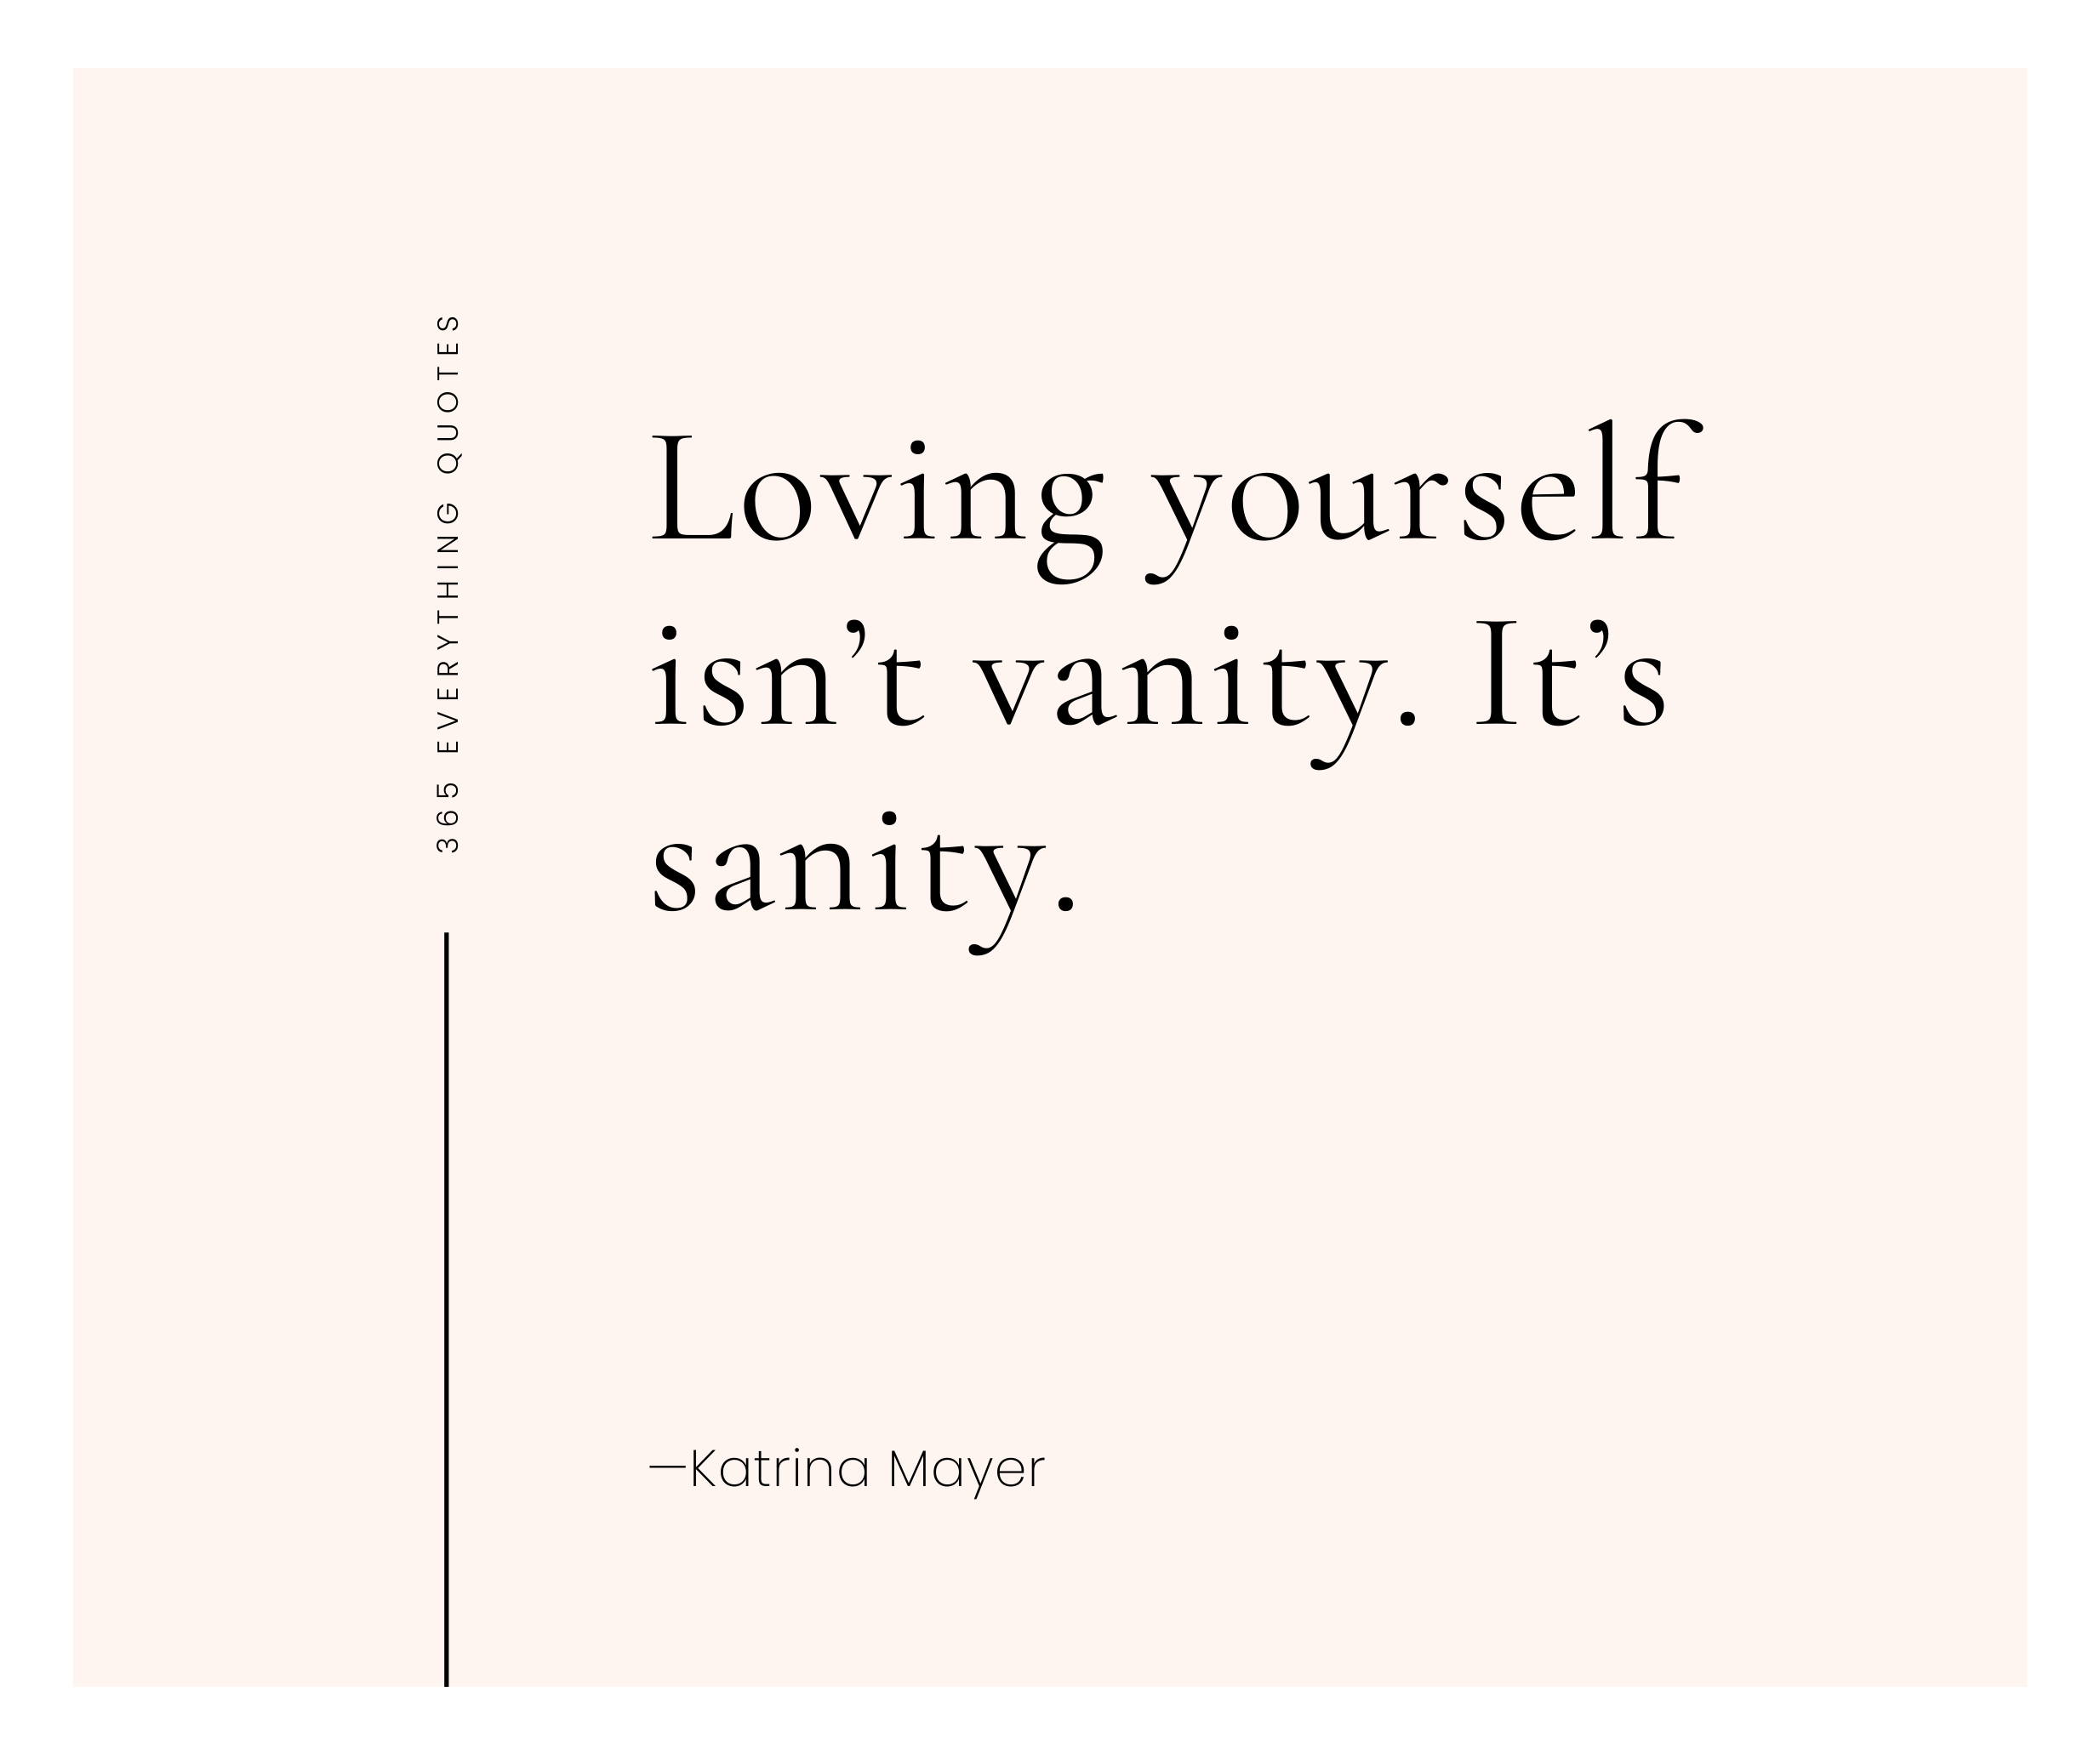 Self Love quotes - Love Quotes Blog Post